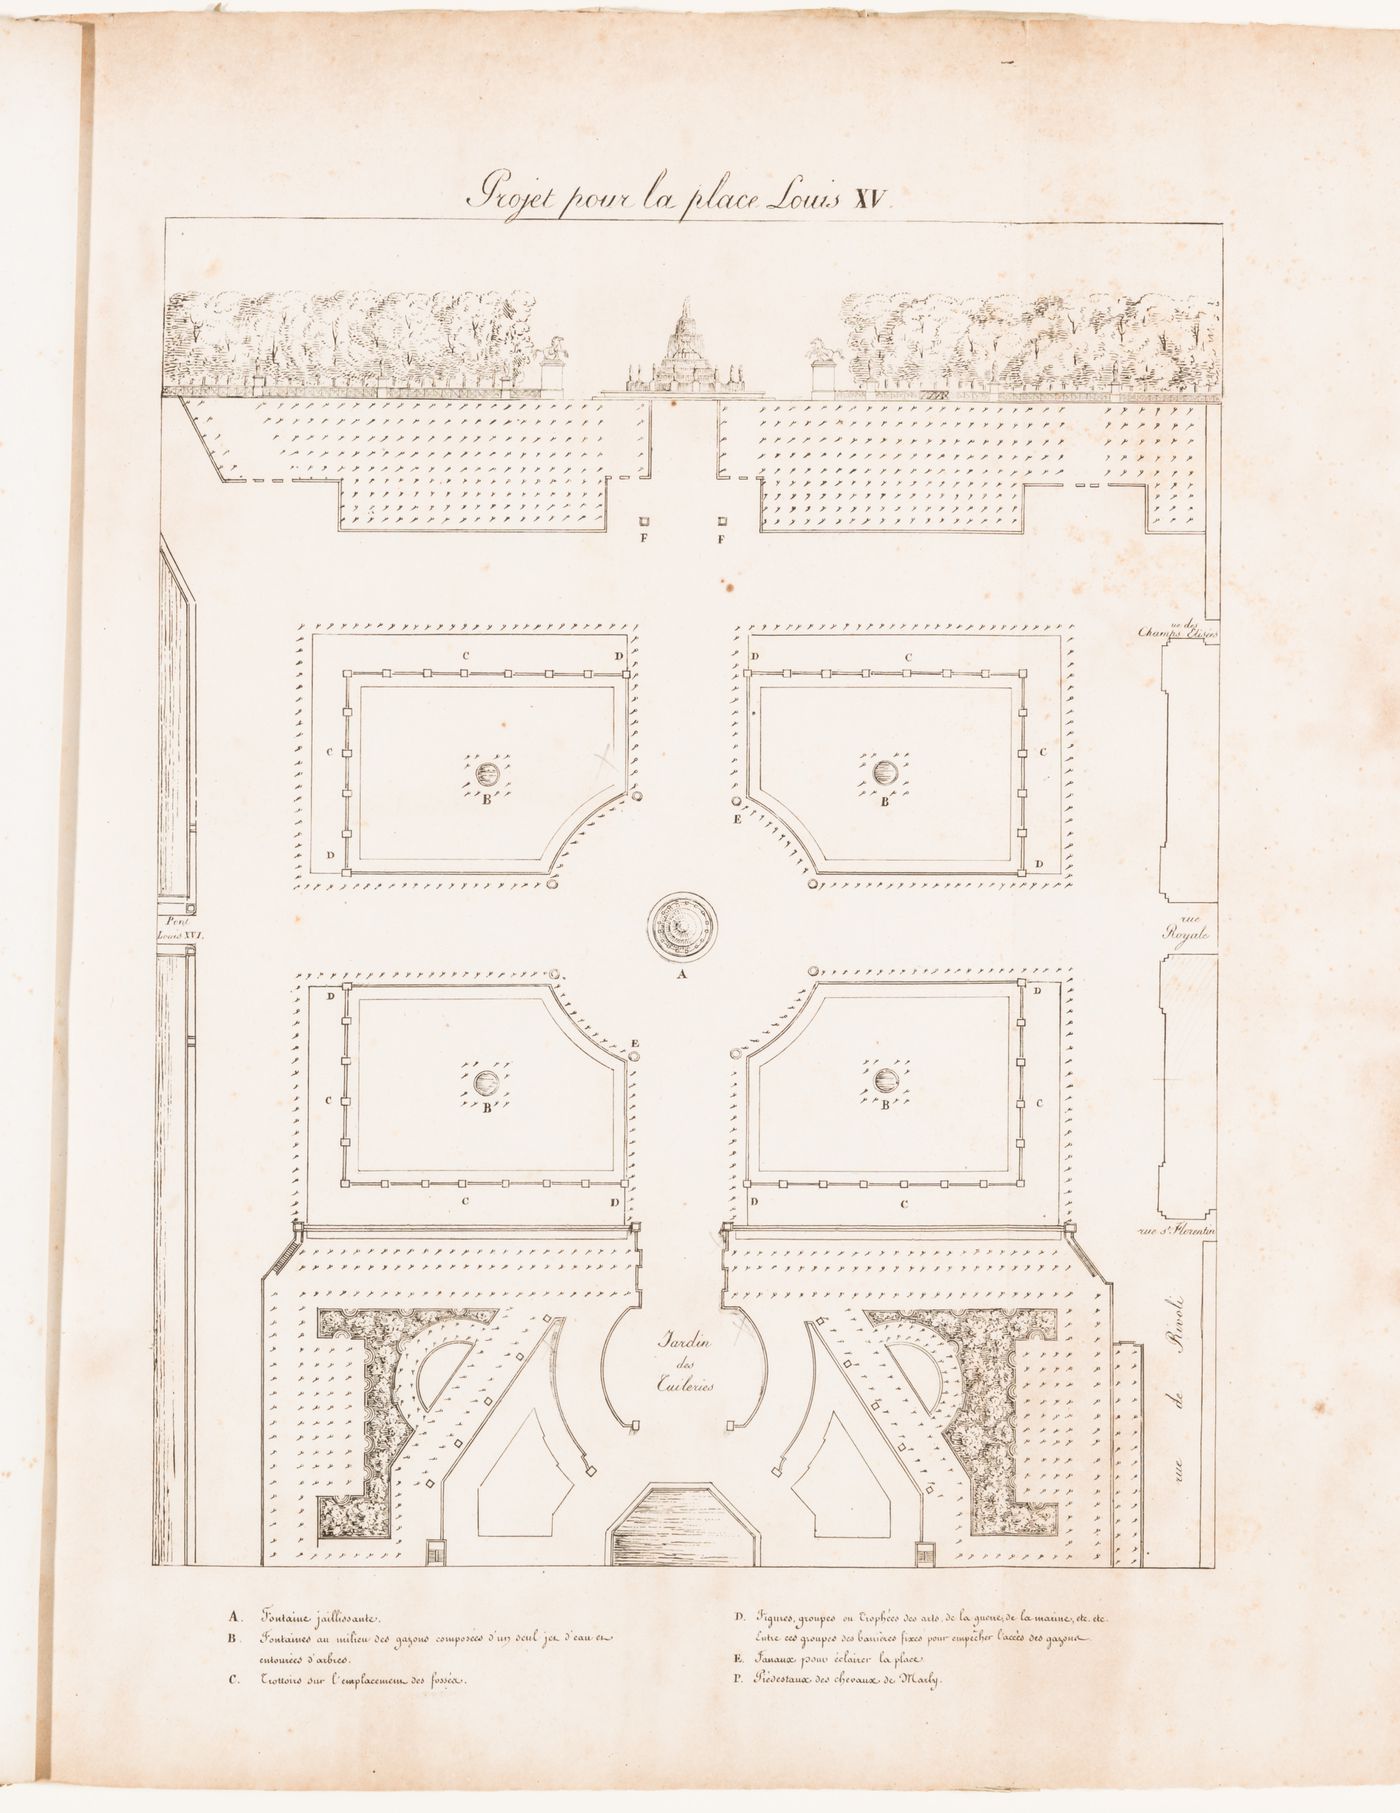 Plan and elevation for place Louis XV with five fountains and a promenade bordered by a row of sculptures